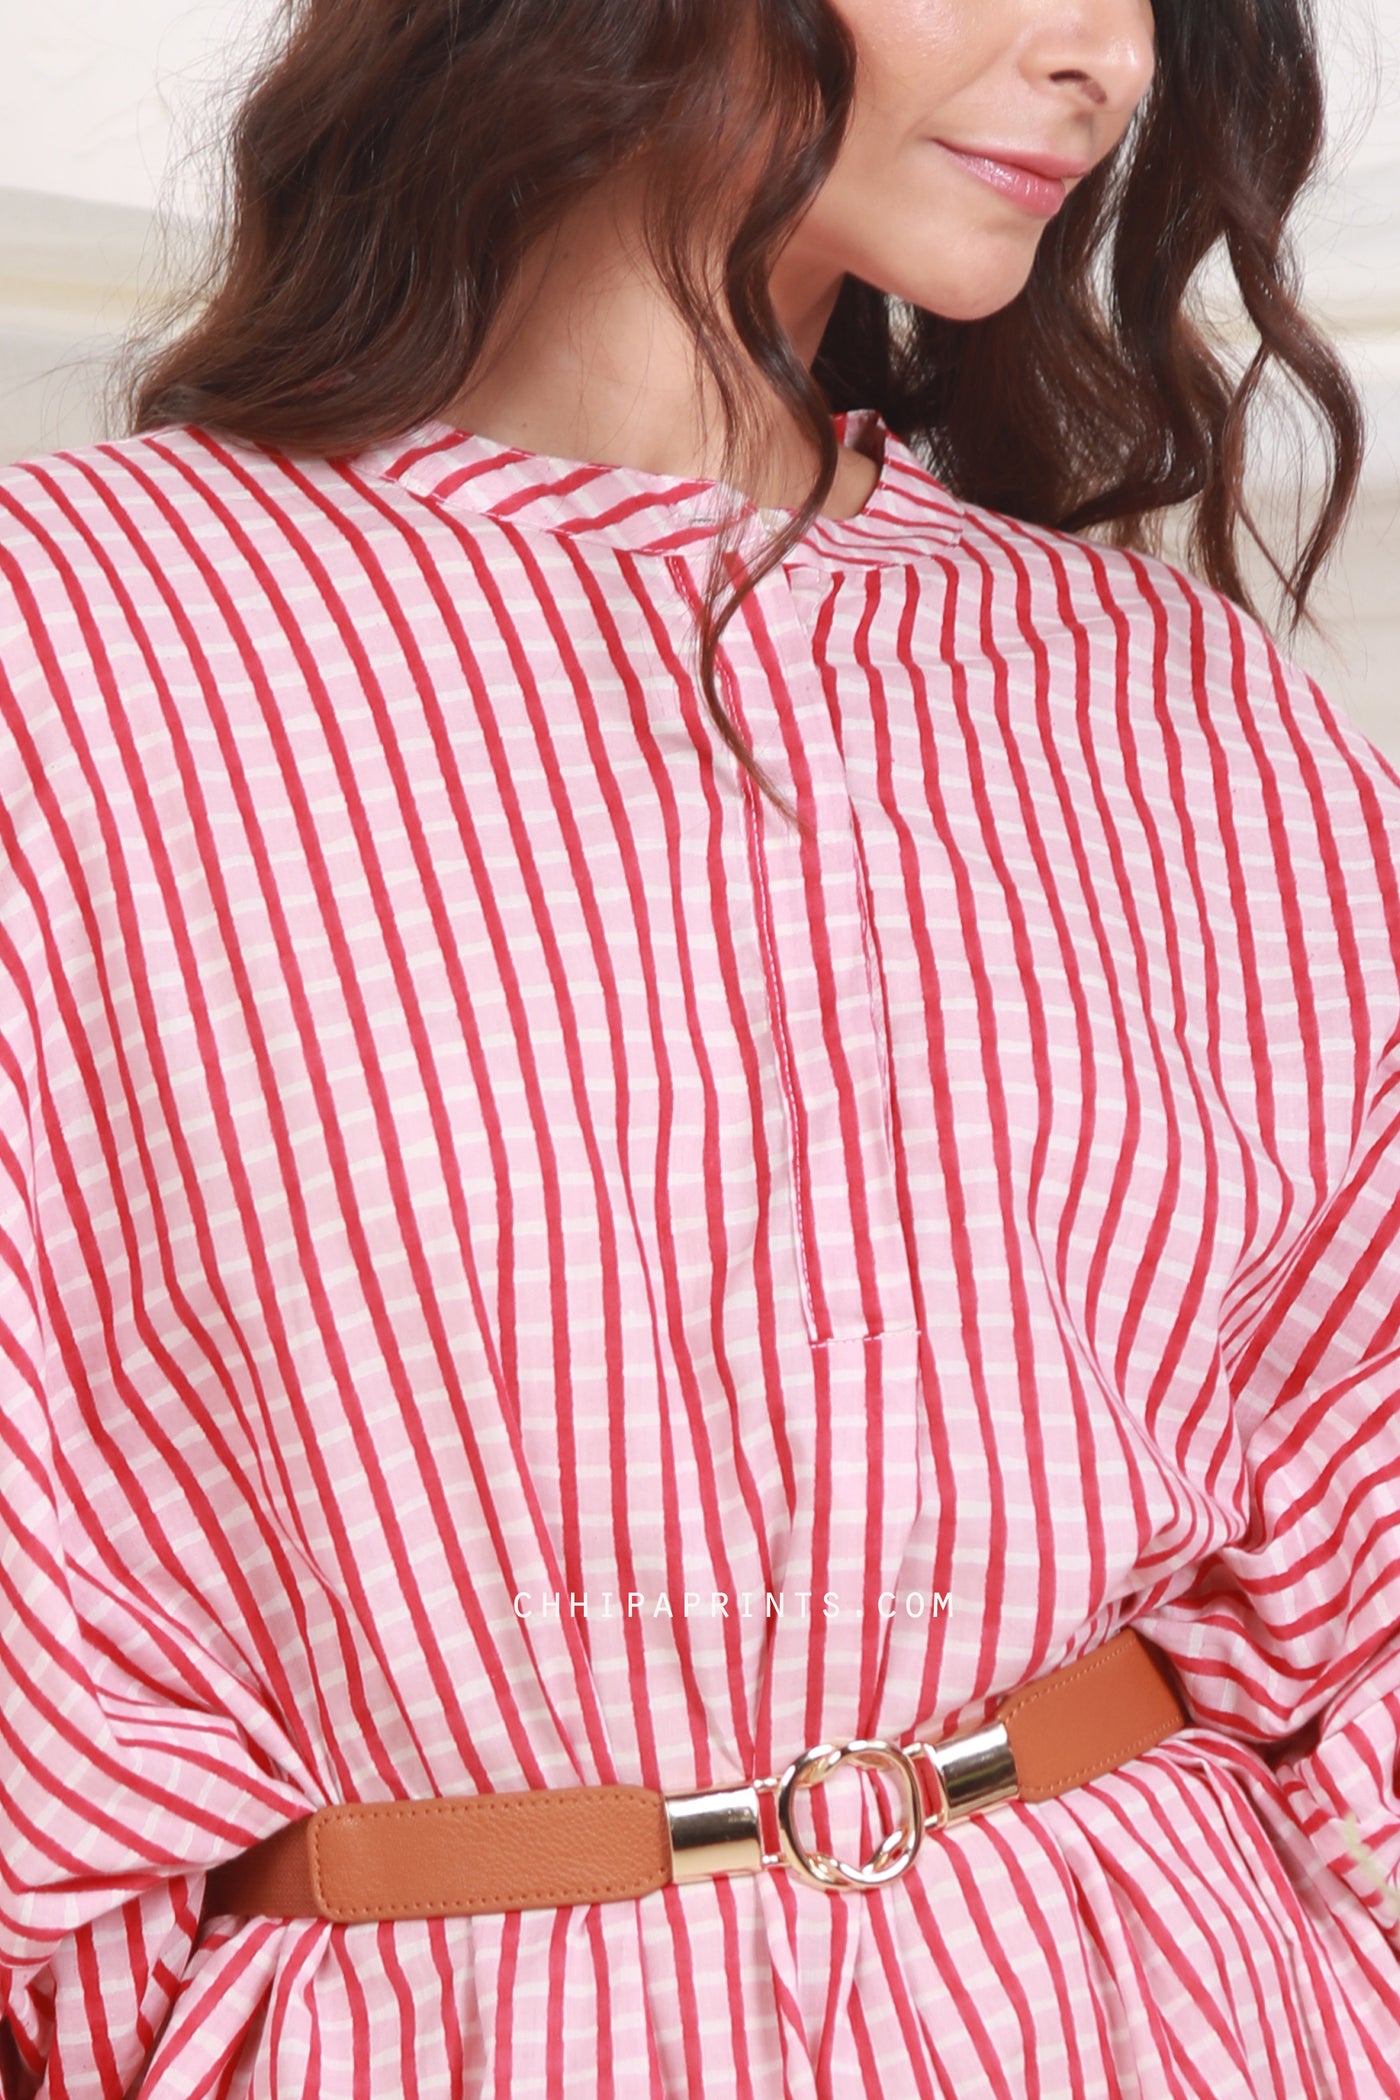 Cotton Checks Print Sunday Tunic in Shades of Red and White